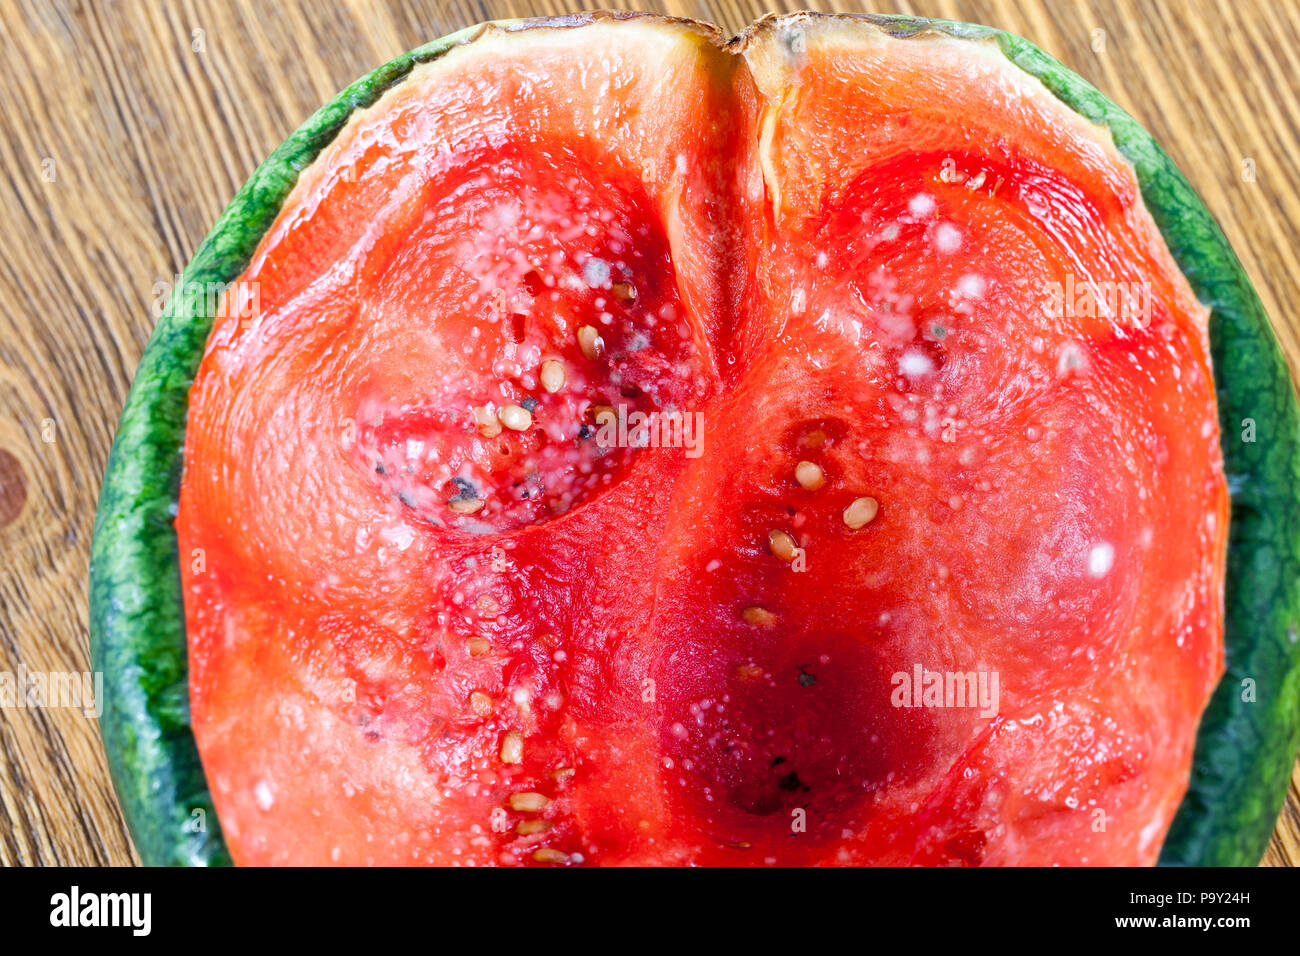 red juicy pulp of ripe watermelon of small size, covered with mold, dangerous food closeup Stock Photo